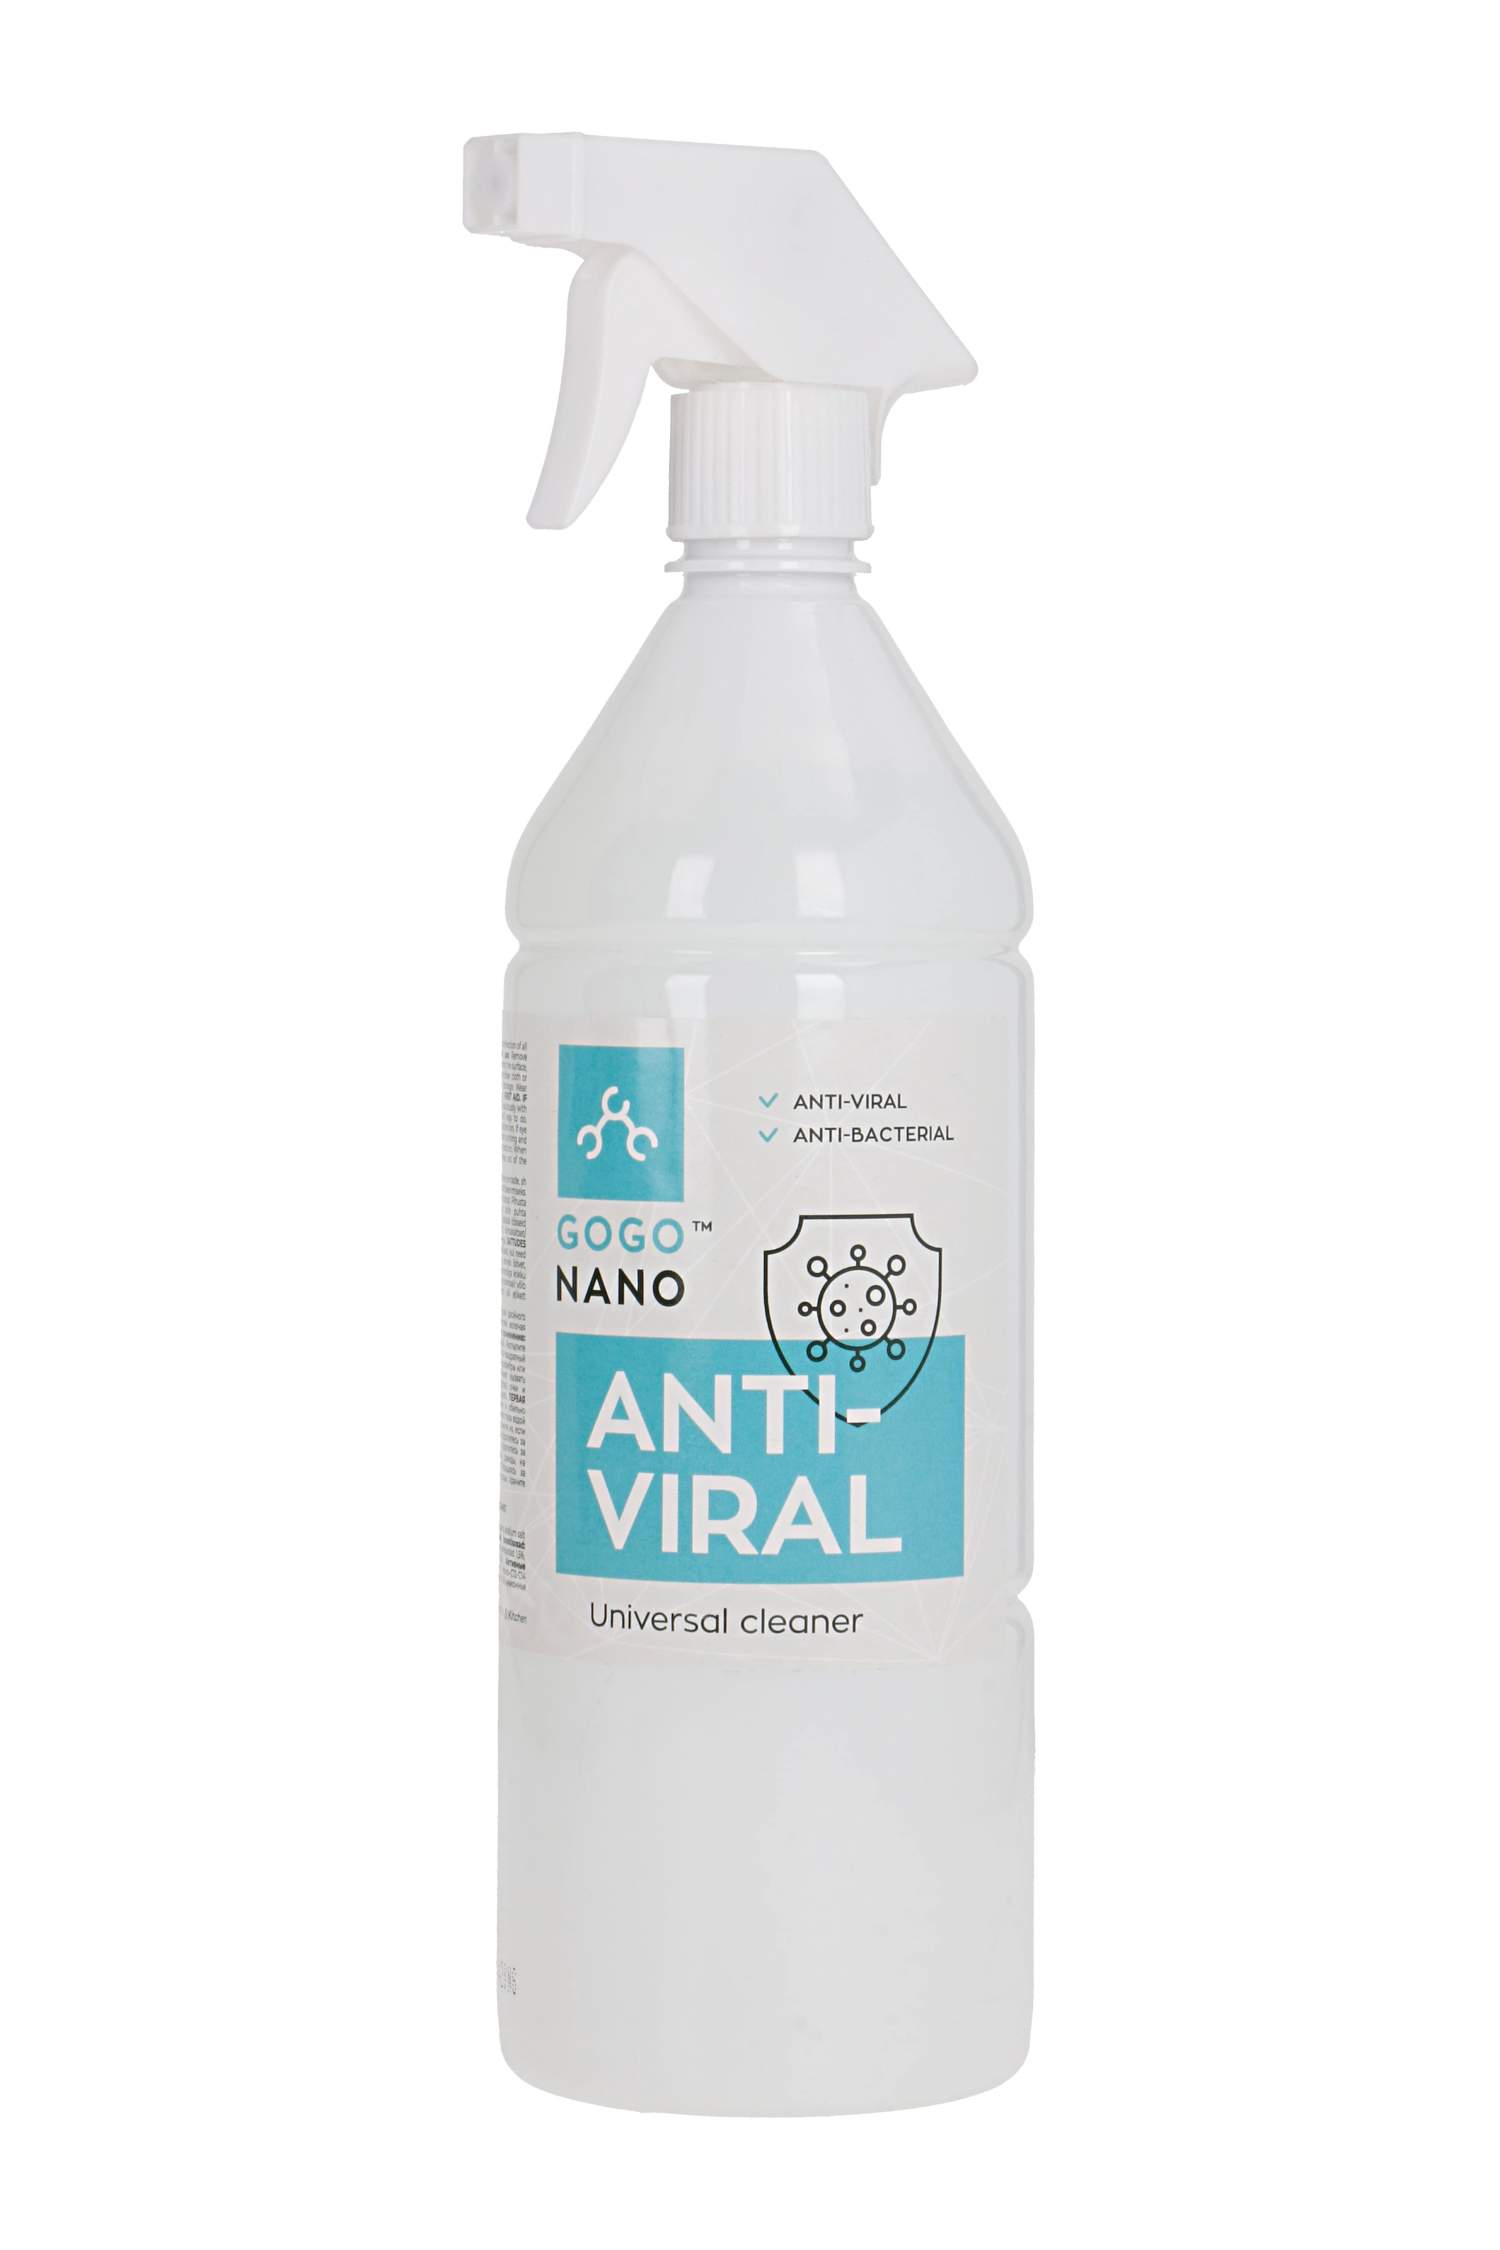 GoGoNano Anti-Viral Sustainable 2-in-1 deep cleaner and disinfectant, 1L spray bottle